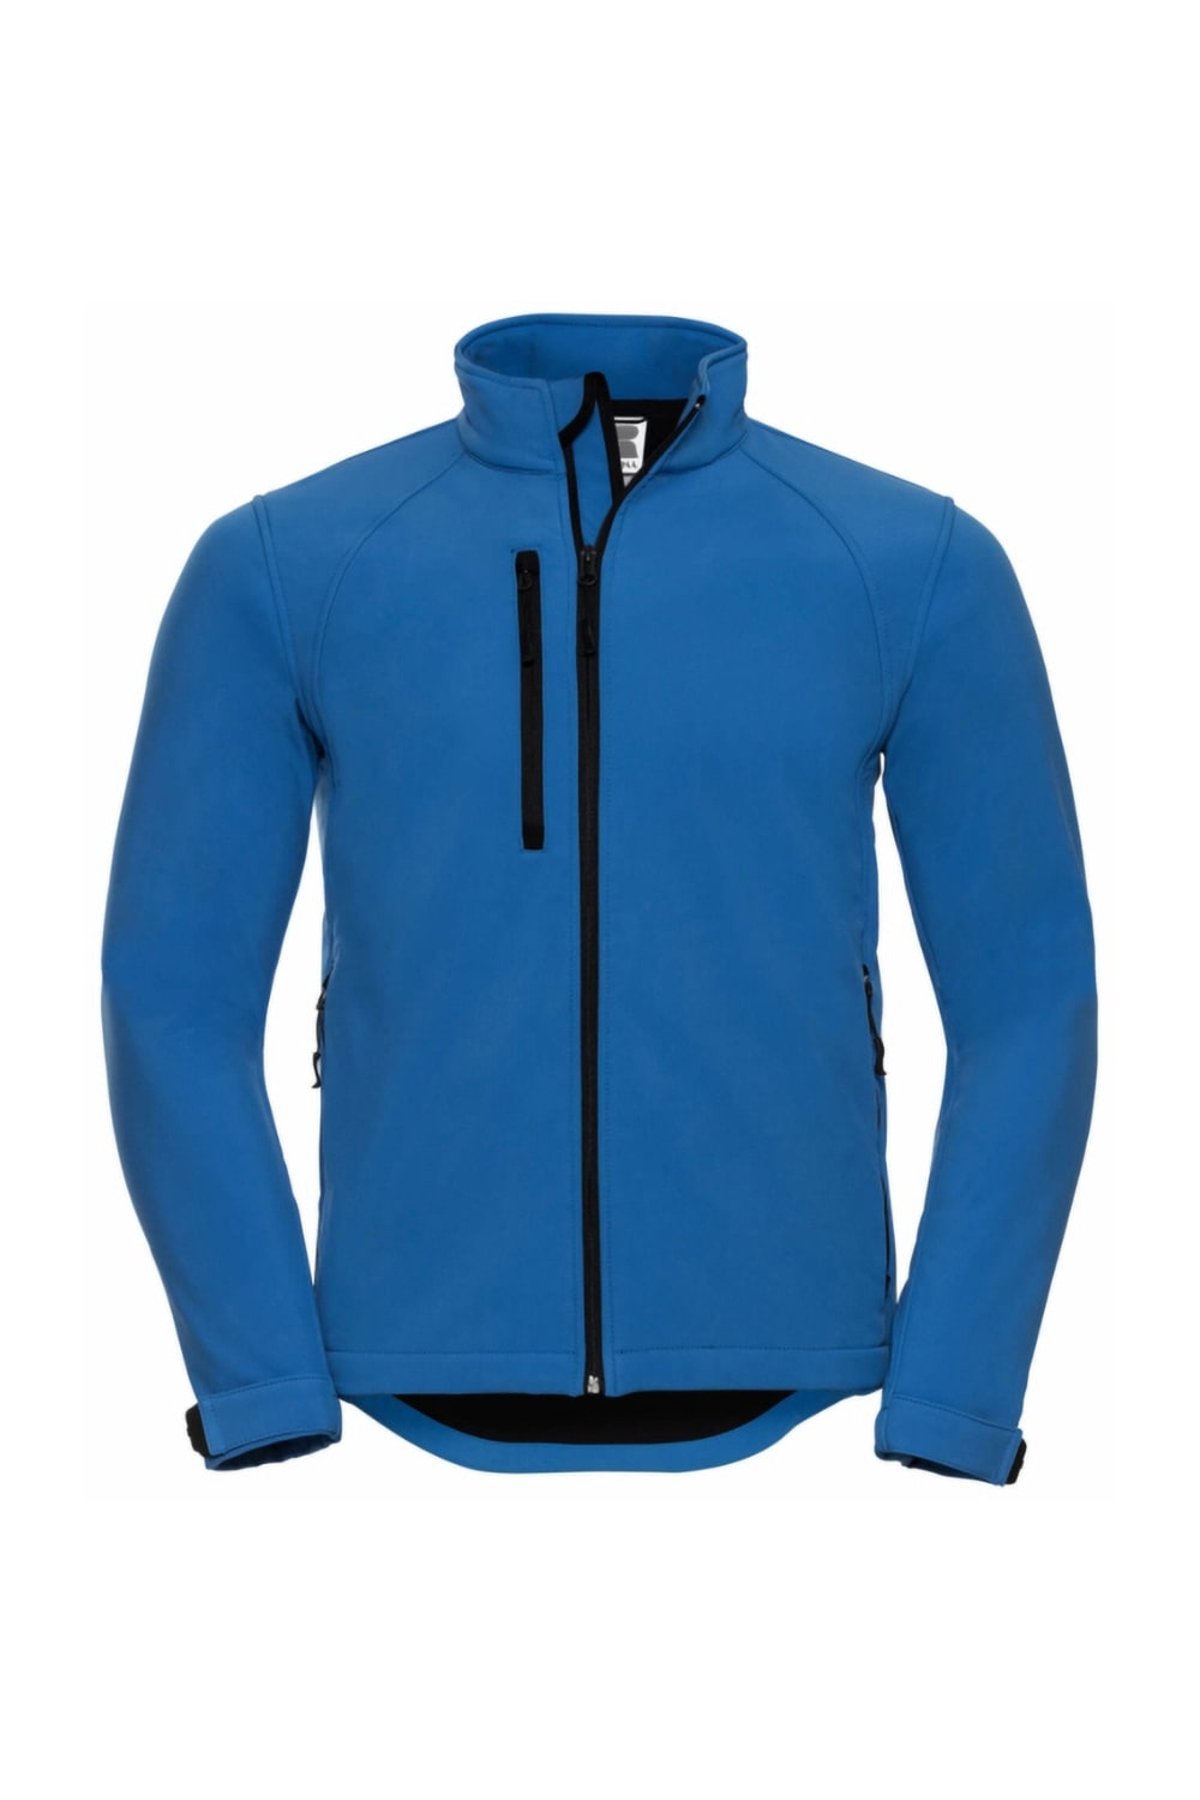 Mens Russell Soft Shell Jacket Breathable windproof and water resistant 5000mm. 